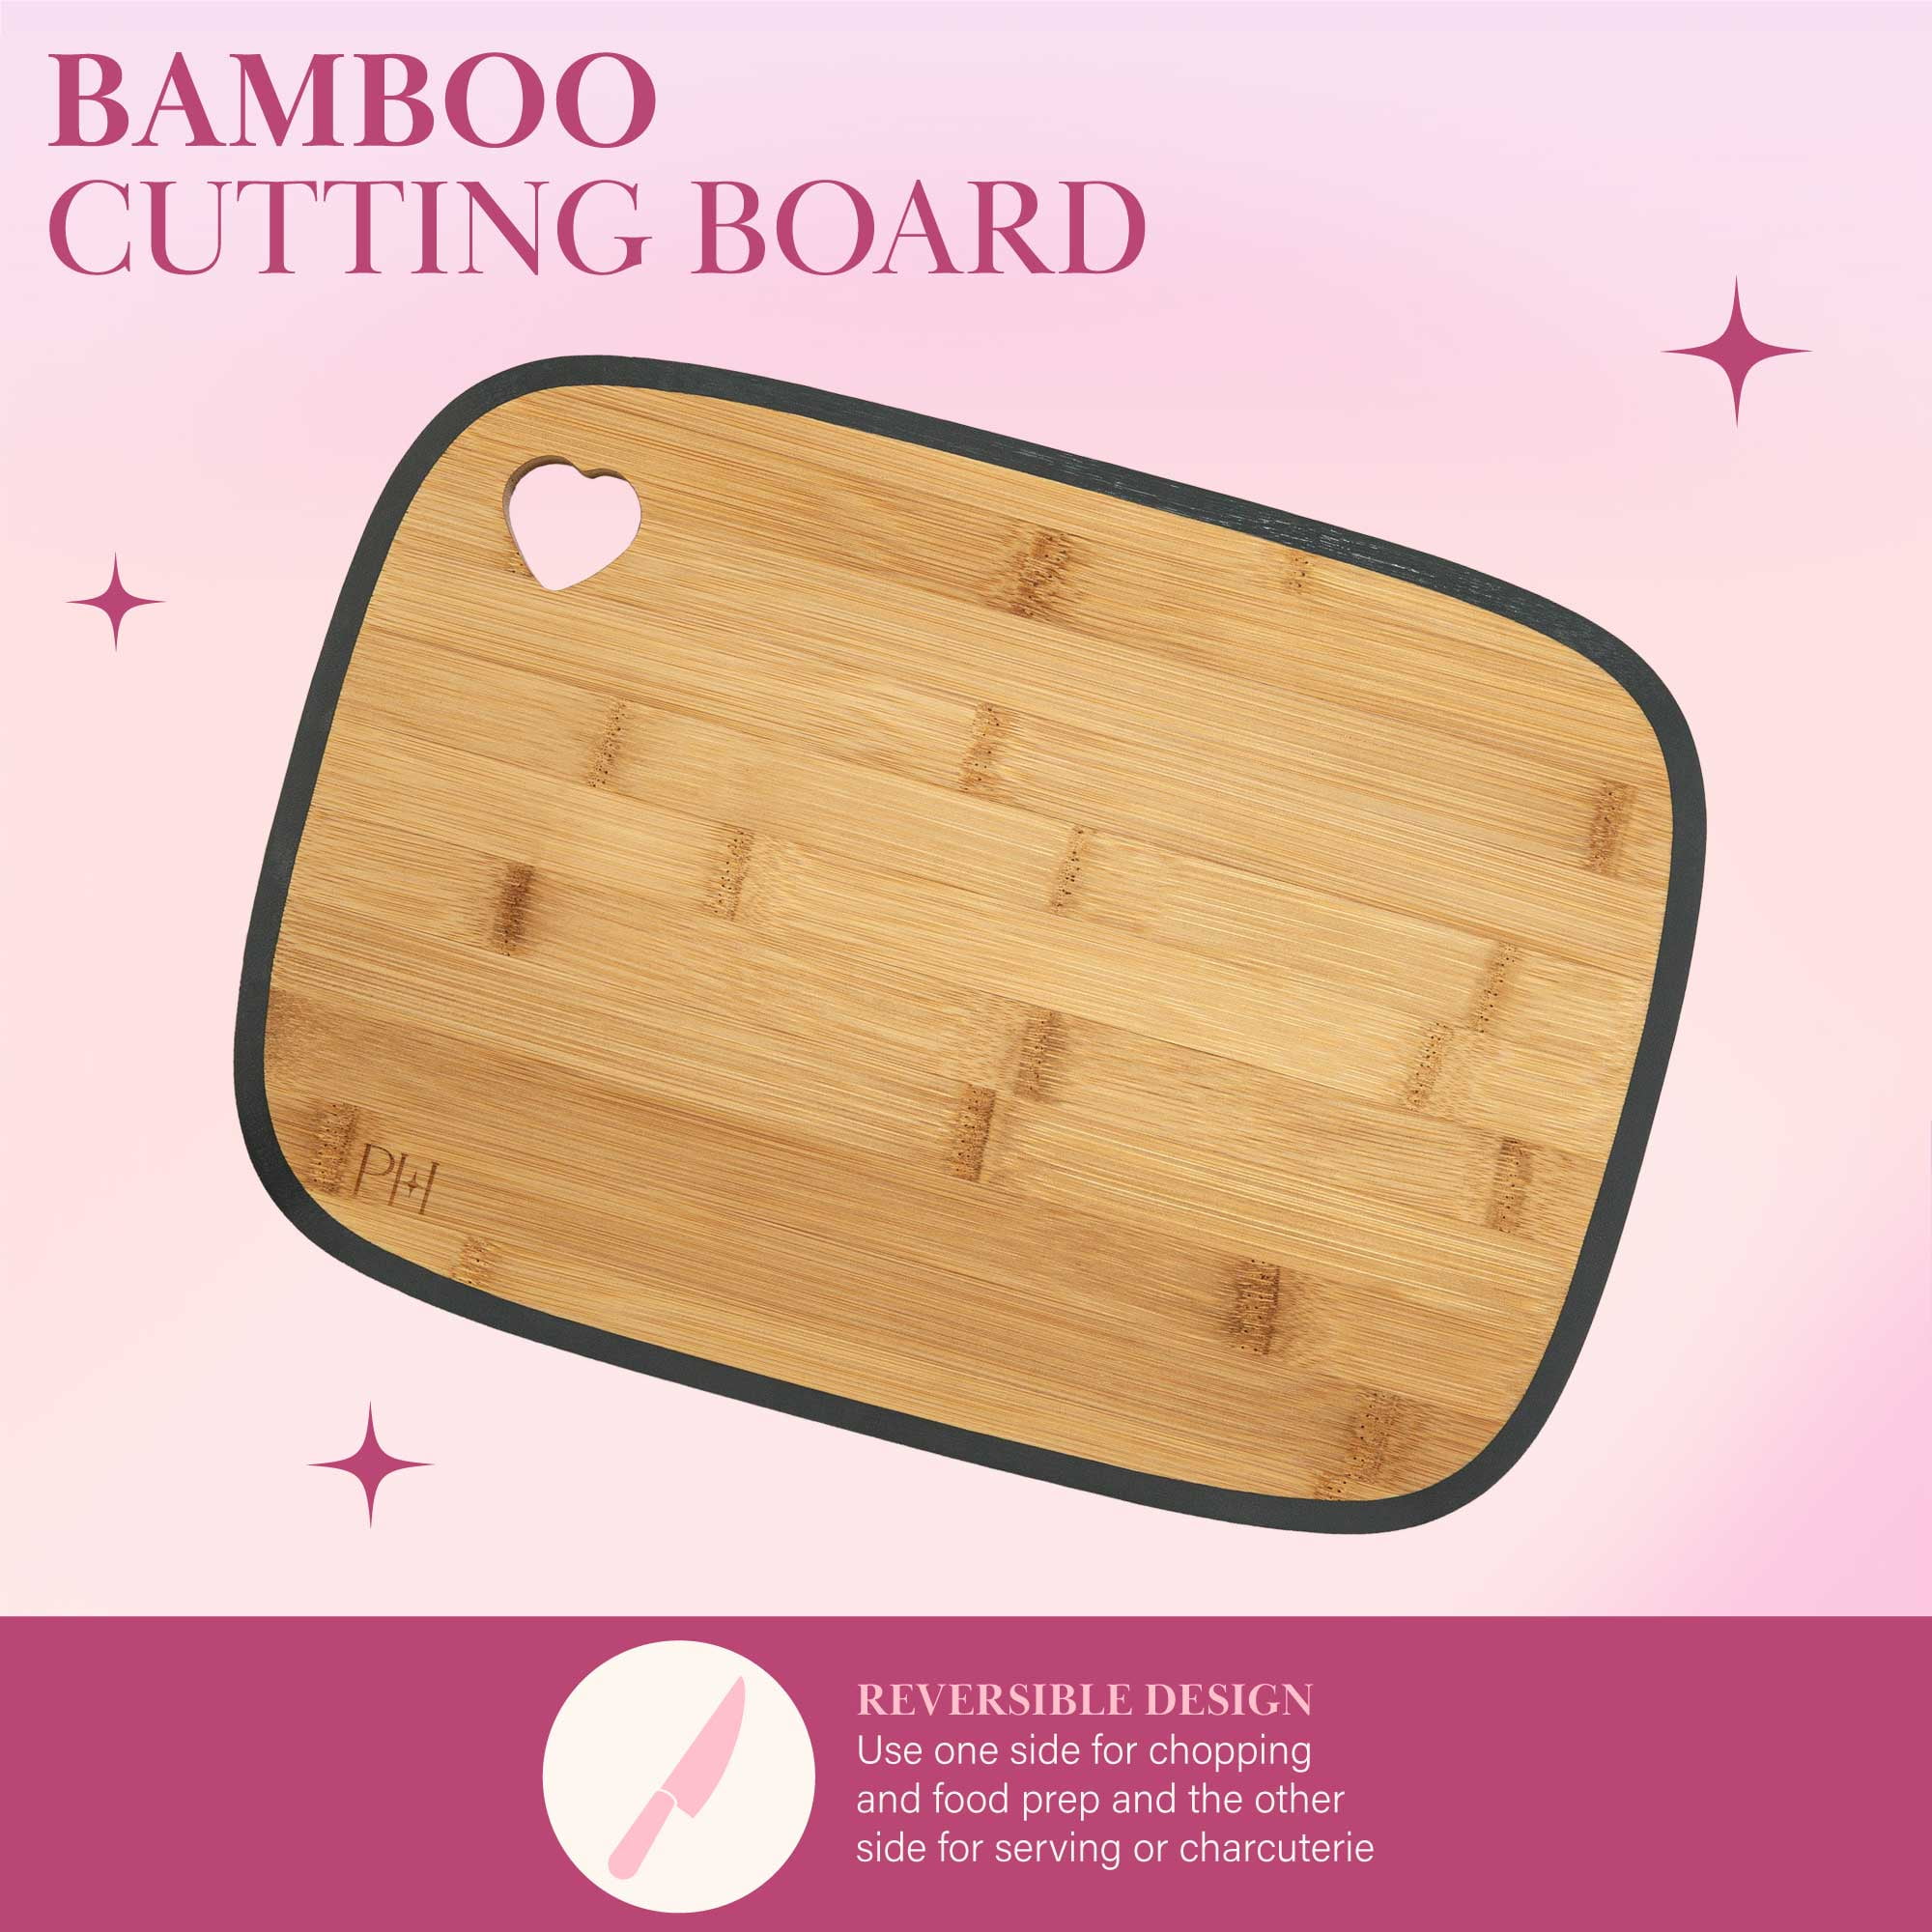  Paris Hilton Reversible Bamboo Cutting Board and Cutlery Set  with Matching High Carbon Stainless Steel Knives, Blade Guards, Sleek Yet  Comfortable Handle Grips, 7-Piece Set Gold, Pink: Home & Kitchen